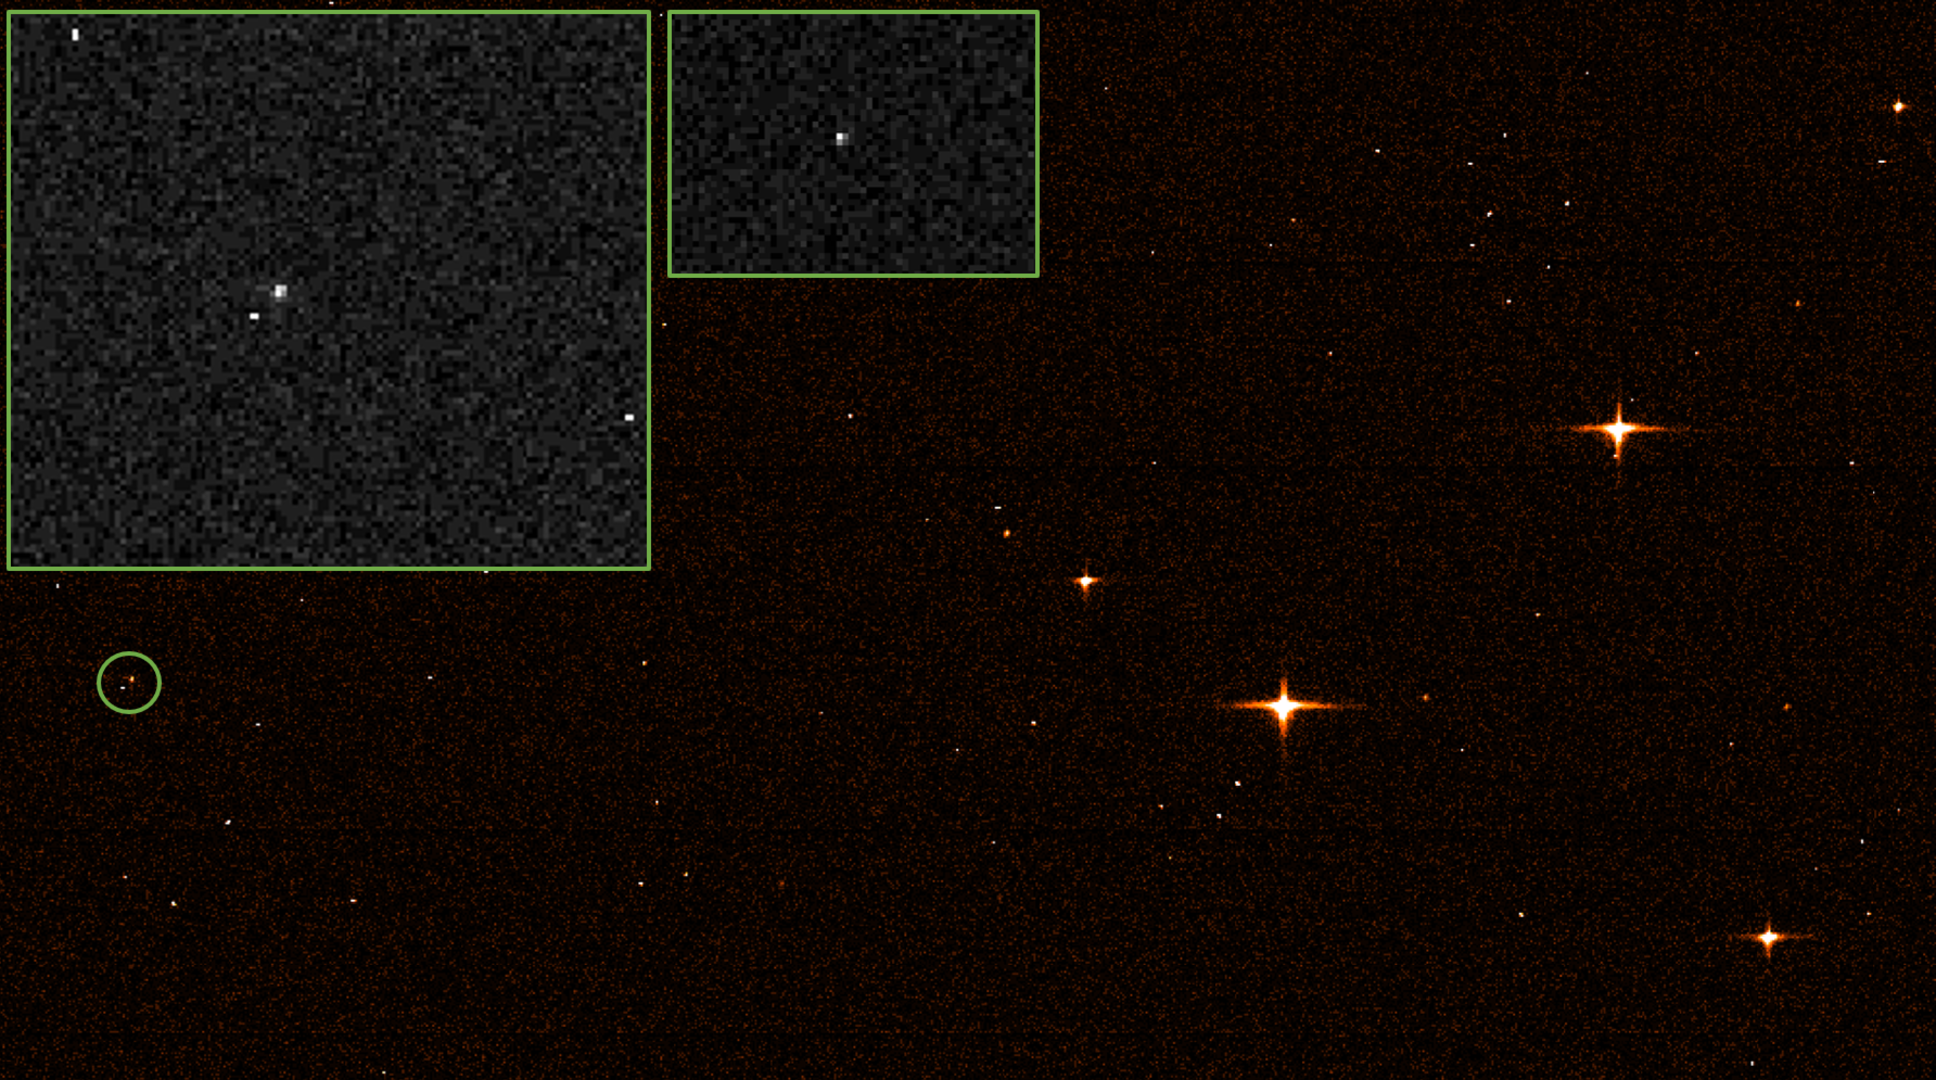 The European Space Agency's Gaia spacecraft spotted the James Webb Space Telescope, circled in green, with two inset views.